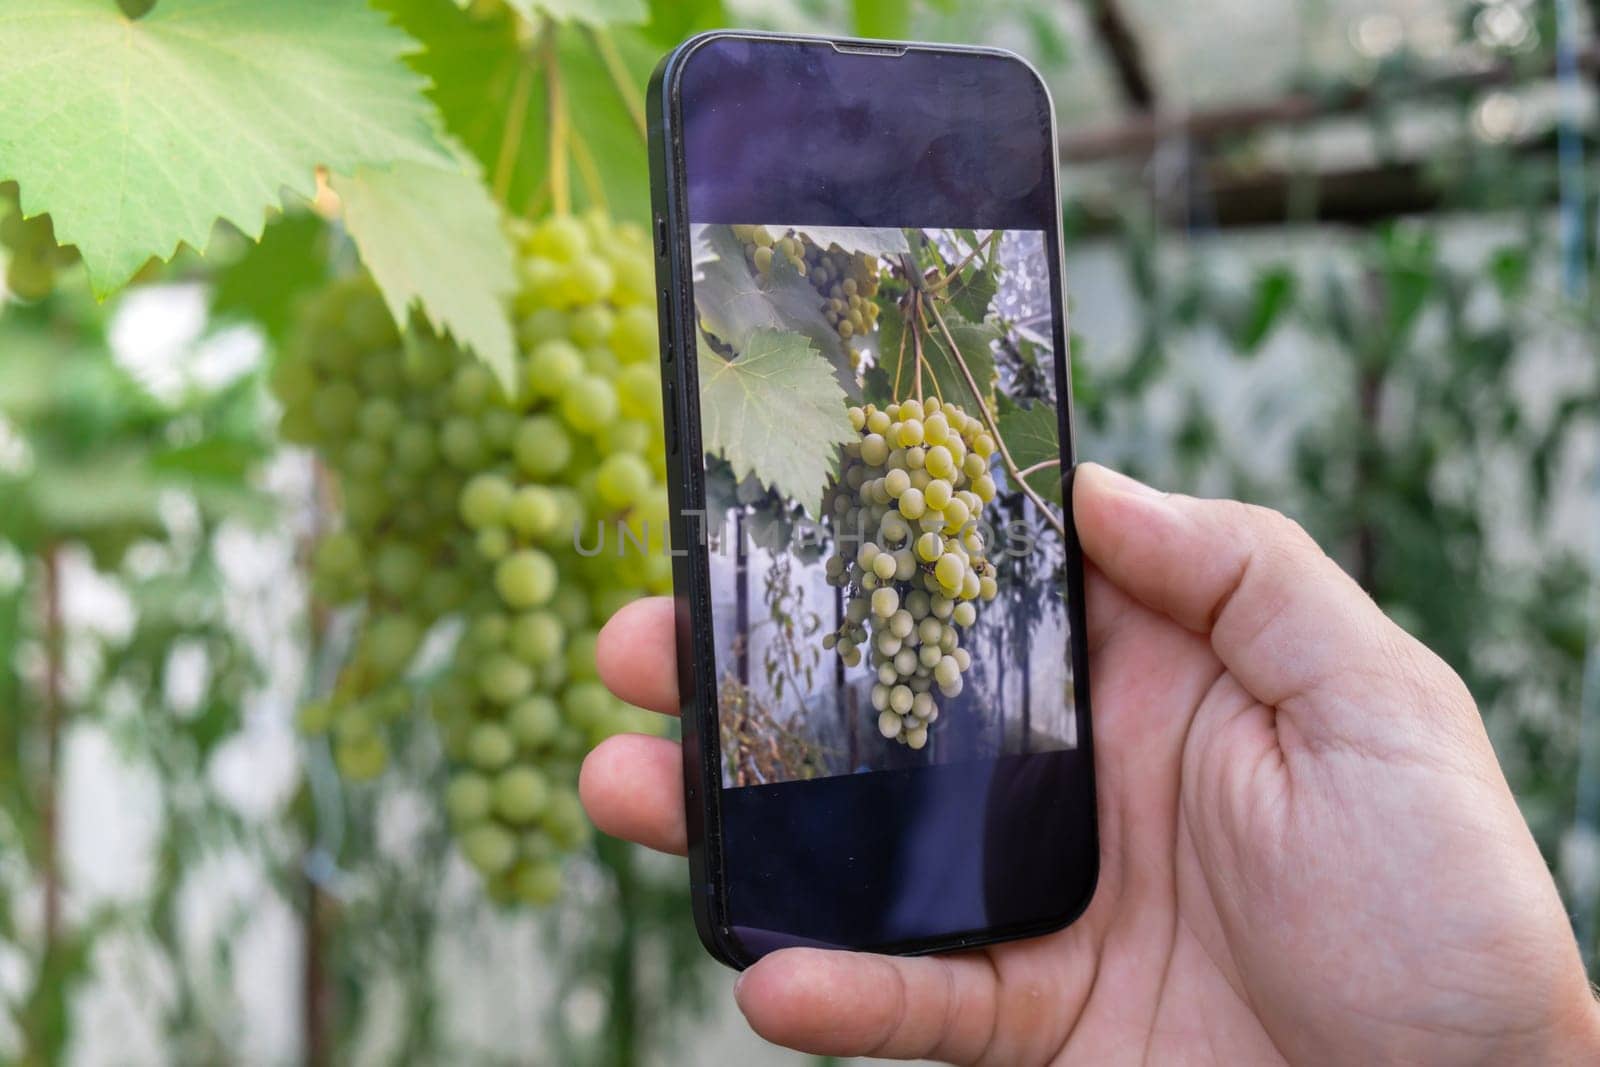 Hand of winemaker photographing green grapes harvest in garden with smartphone. Online selling through social media locally grown organic veggies from greenhouse. Smart farming technology concept